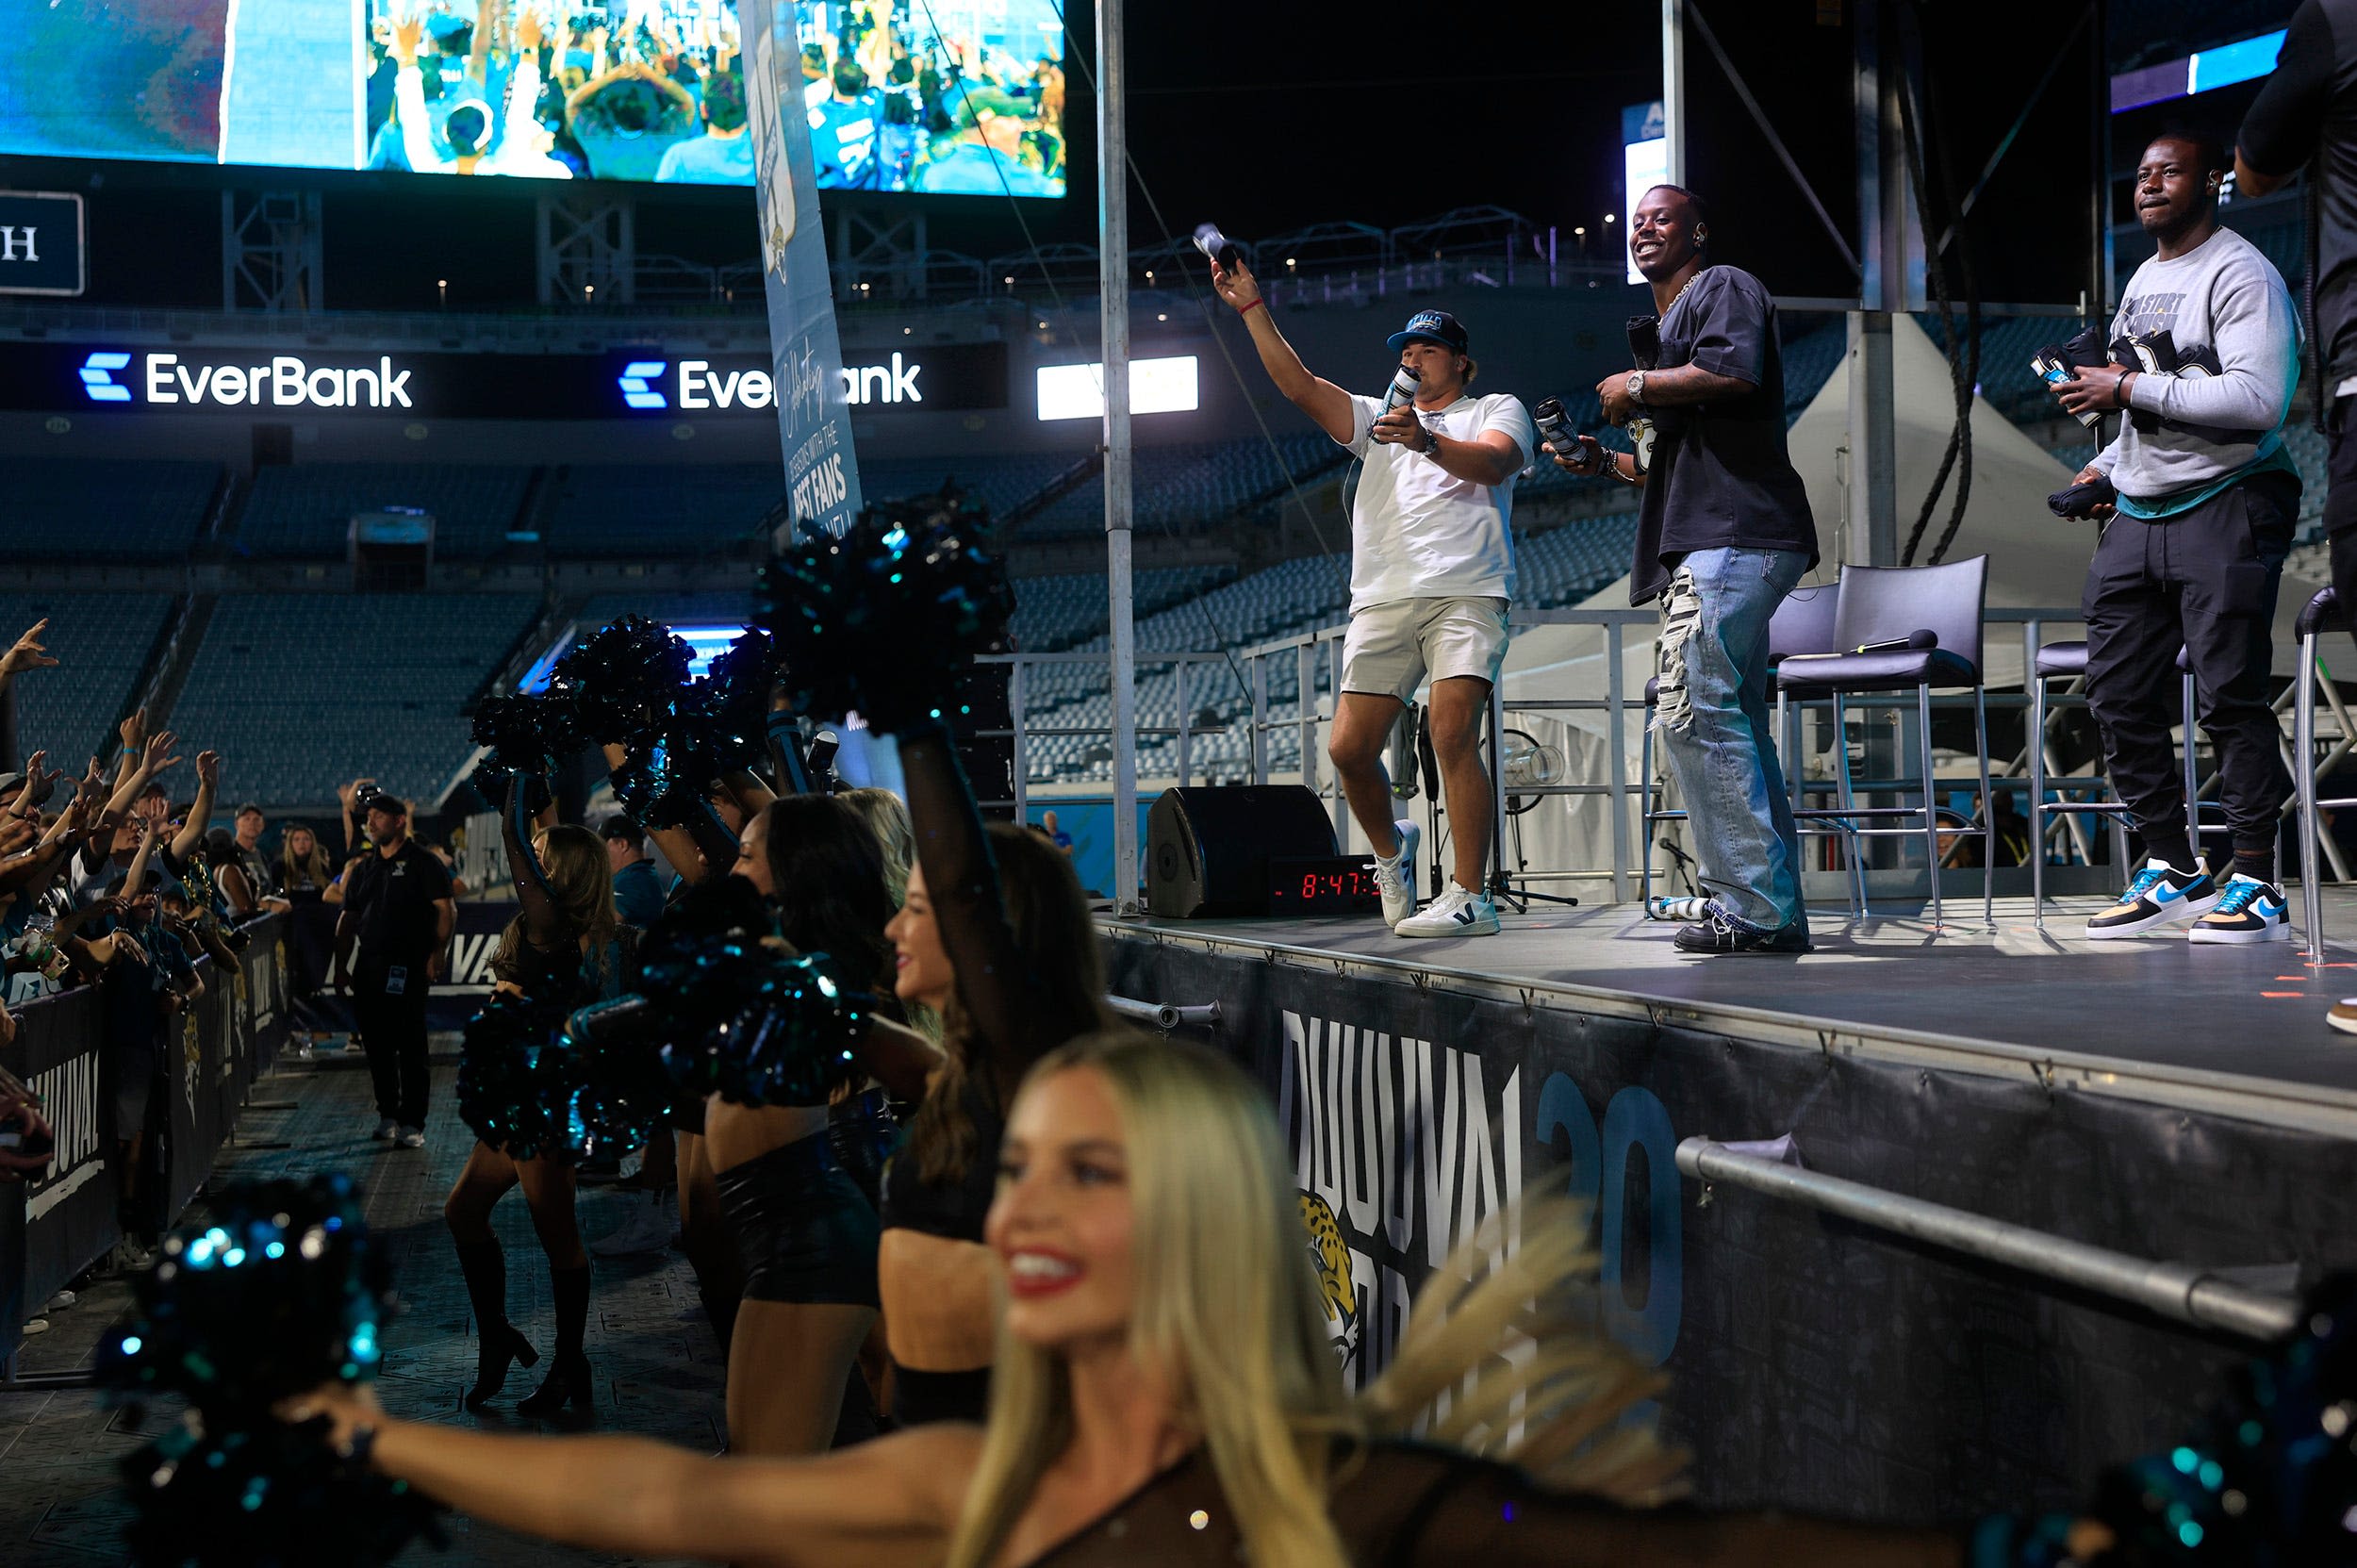 Jaguars fans made the best of a long night before LSU wide receiver Brian Thomas was picked